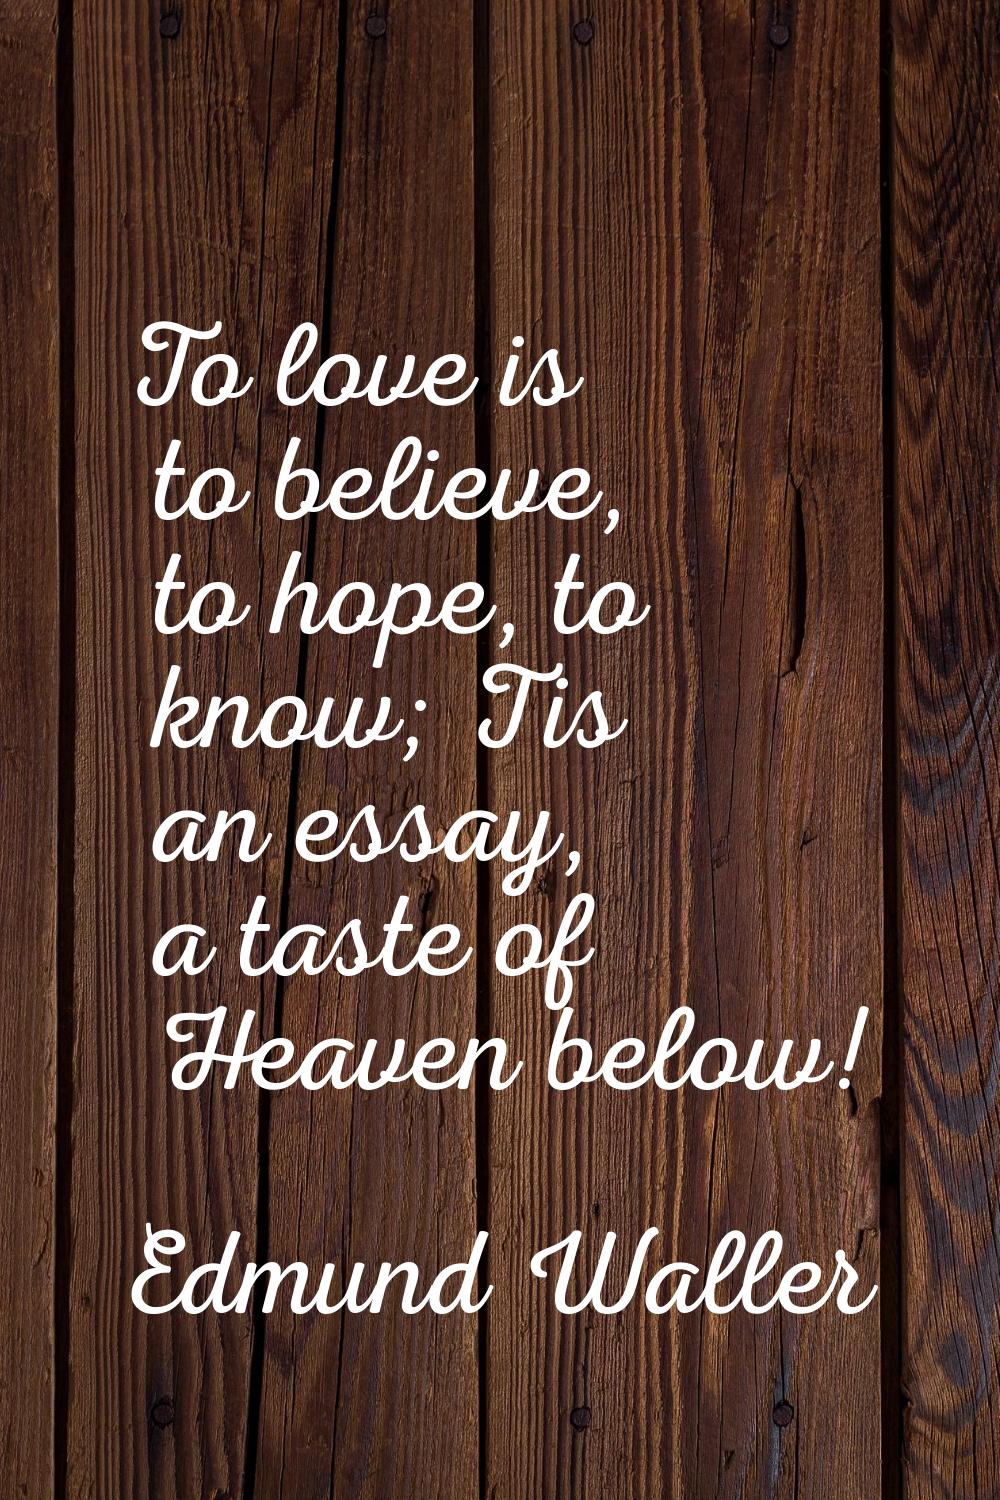 To love is to believe, to hope, to know; Tis an essay, a taste of Heaven below!